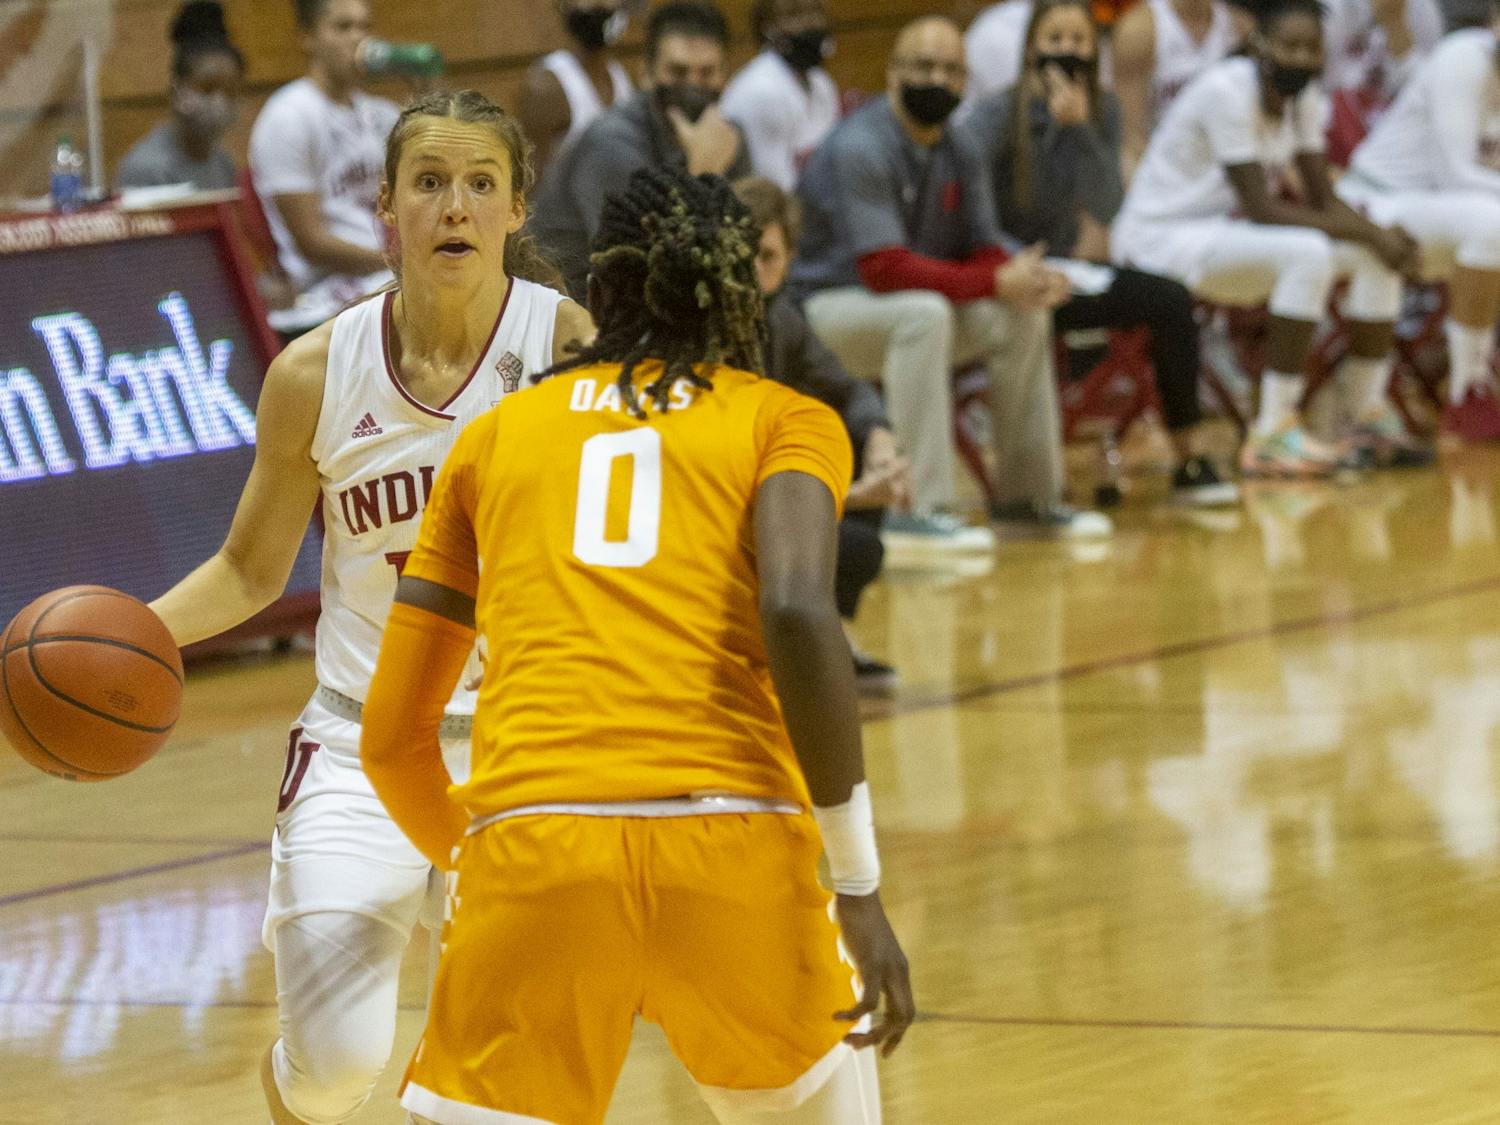 GALLERY: No. 15 IU women's basketball loses to University of Tennessee 58-66